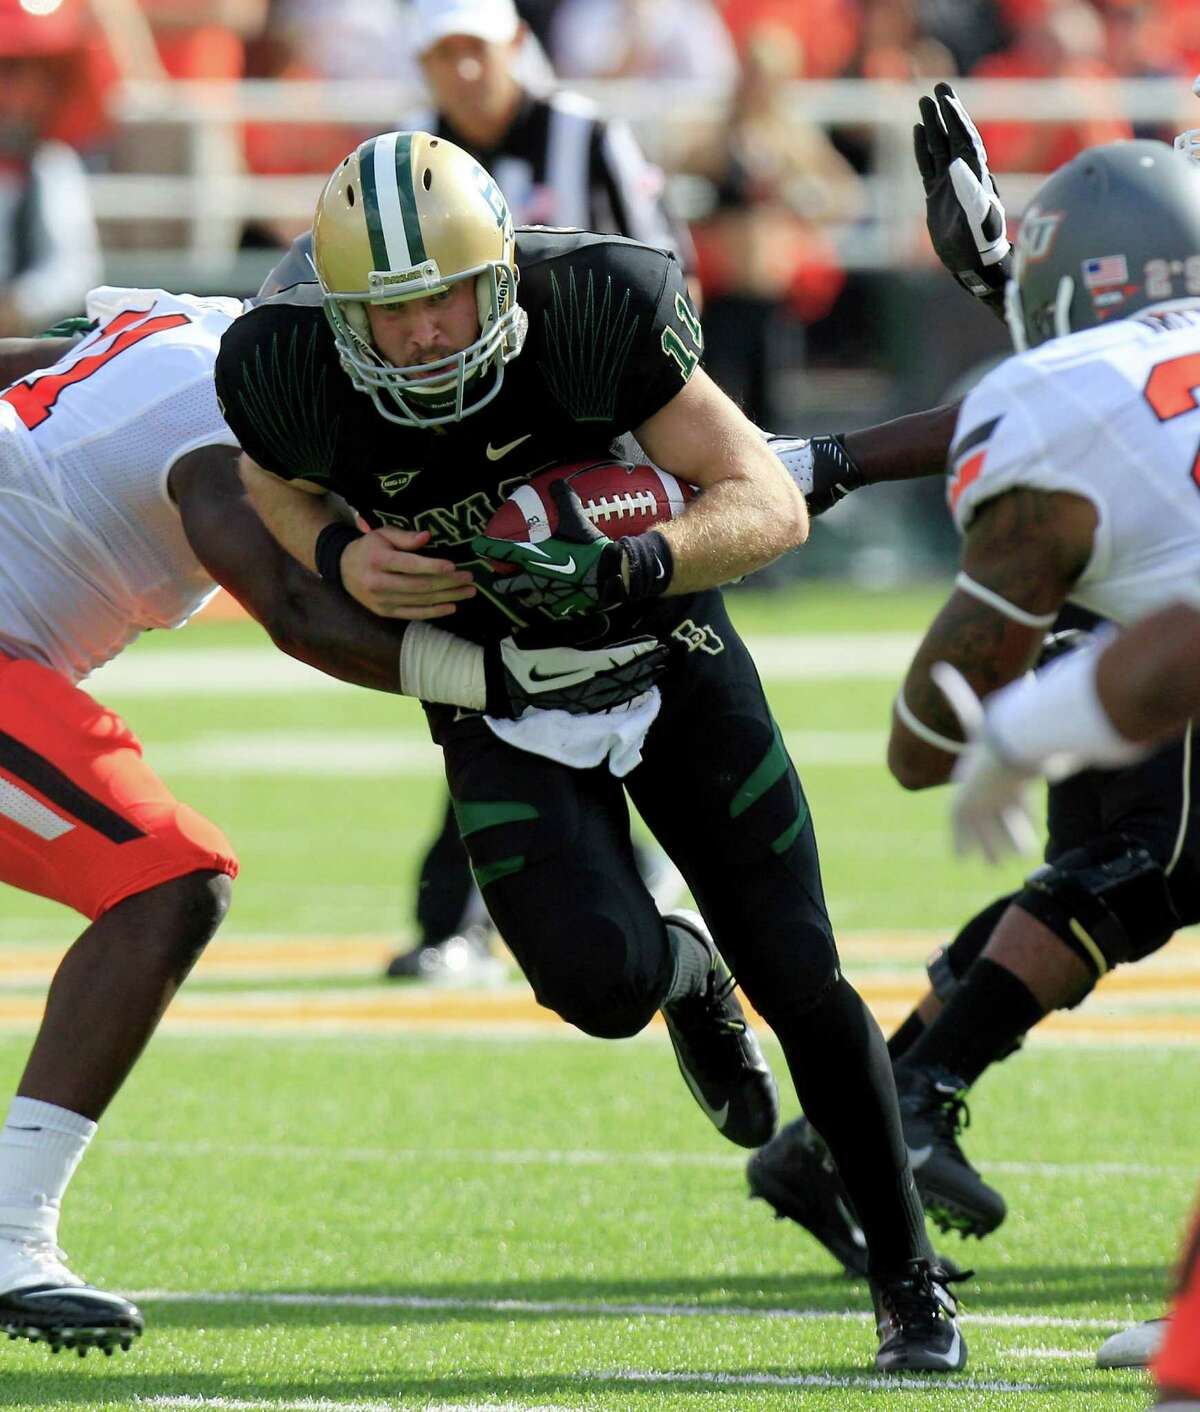 Baylor quarterback Nick Florence (11) runs on the keeper against Oklahoma State linebacker Shaun Lewis (11) during the second half of an NCAA college football game, Saturday, Dec. 1, 2012, in Waco, Texas. Baylor won 41-34. (AP Photo/LM Otero)